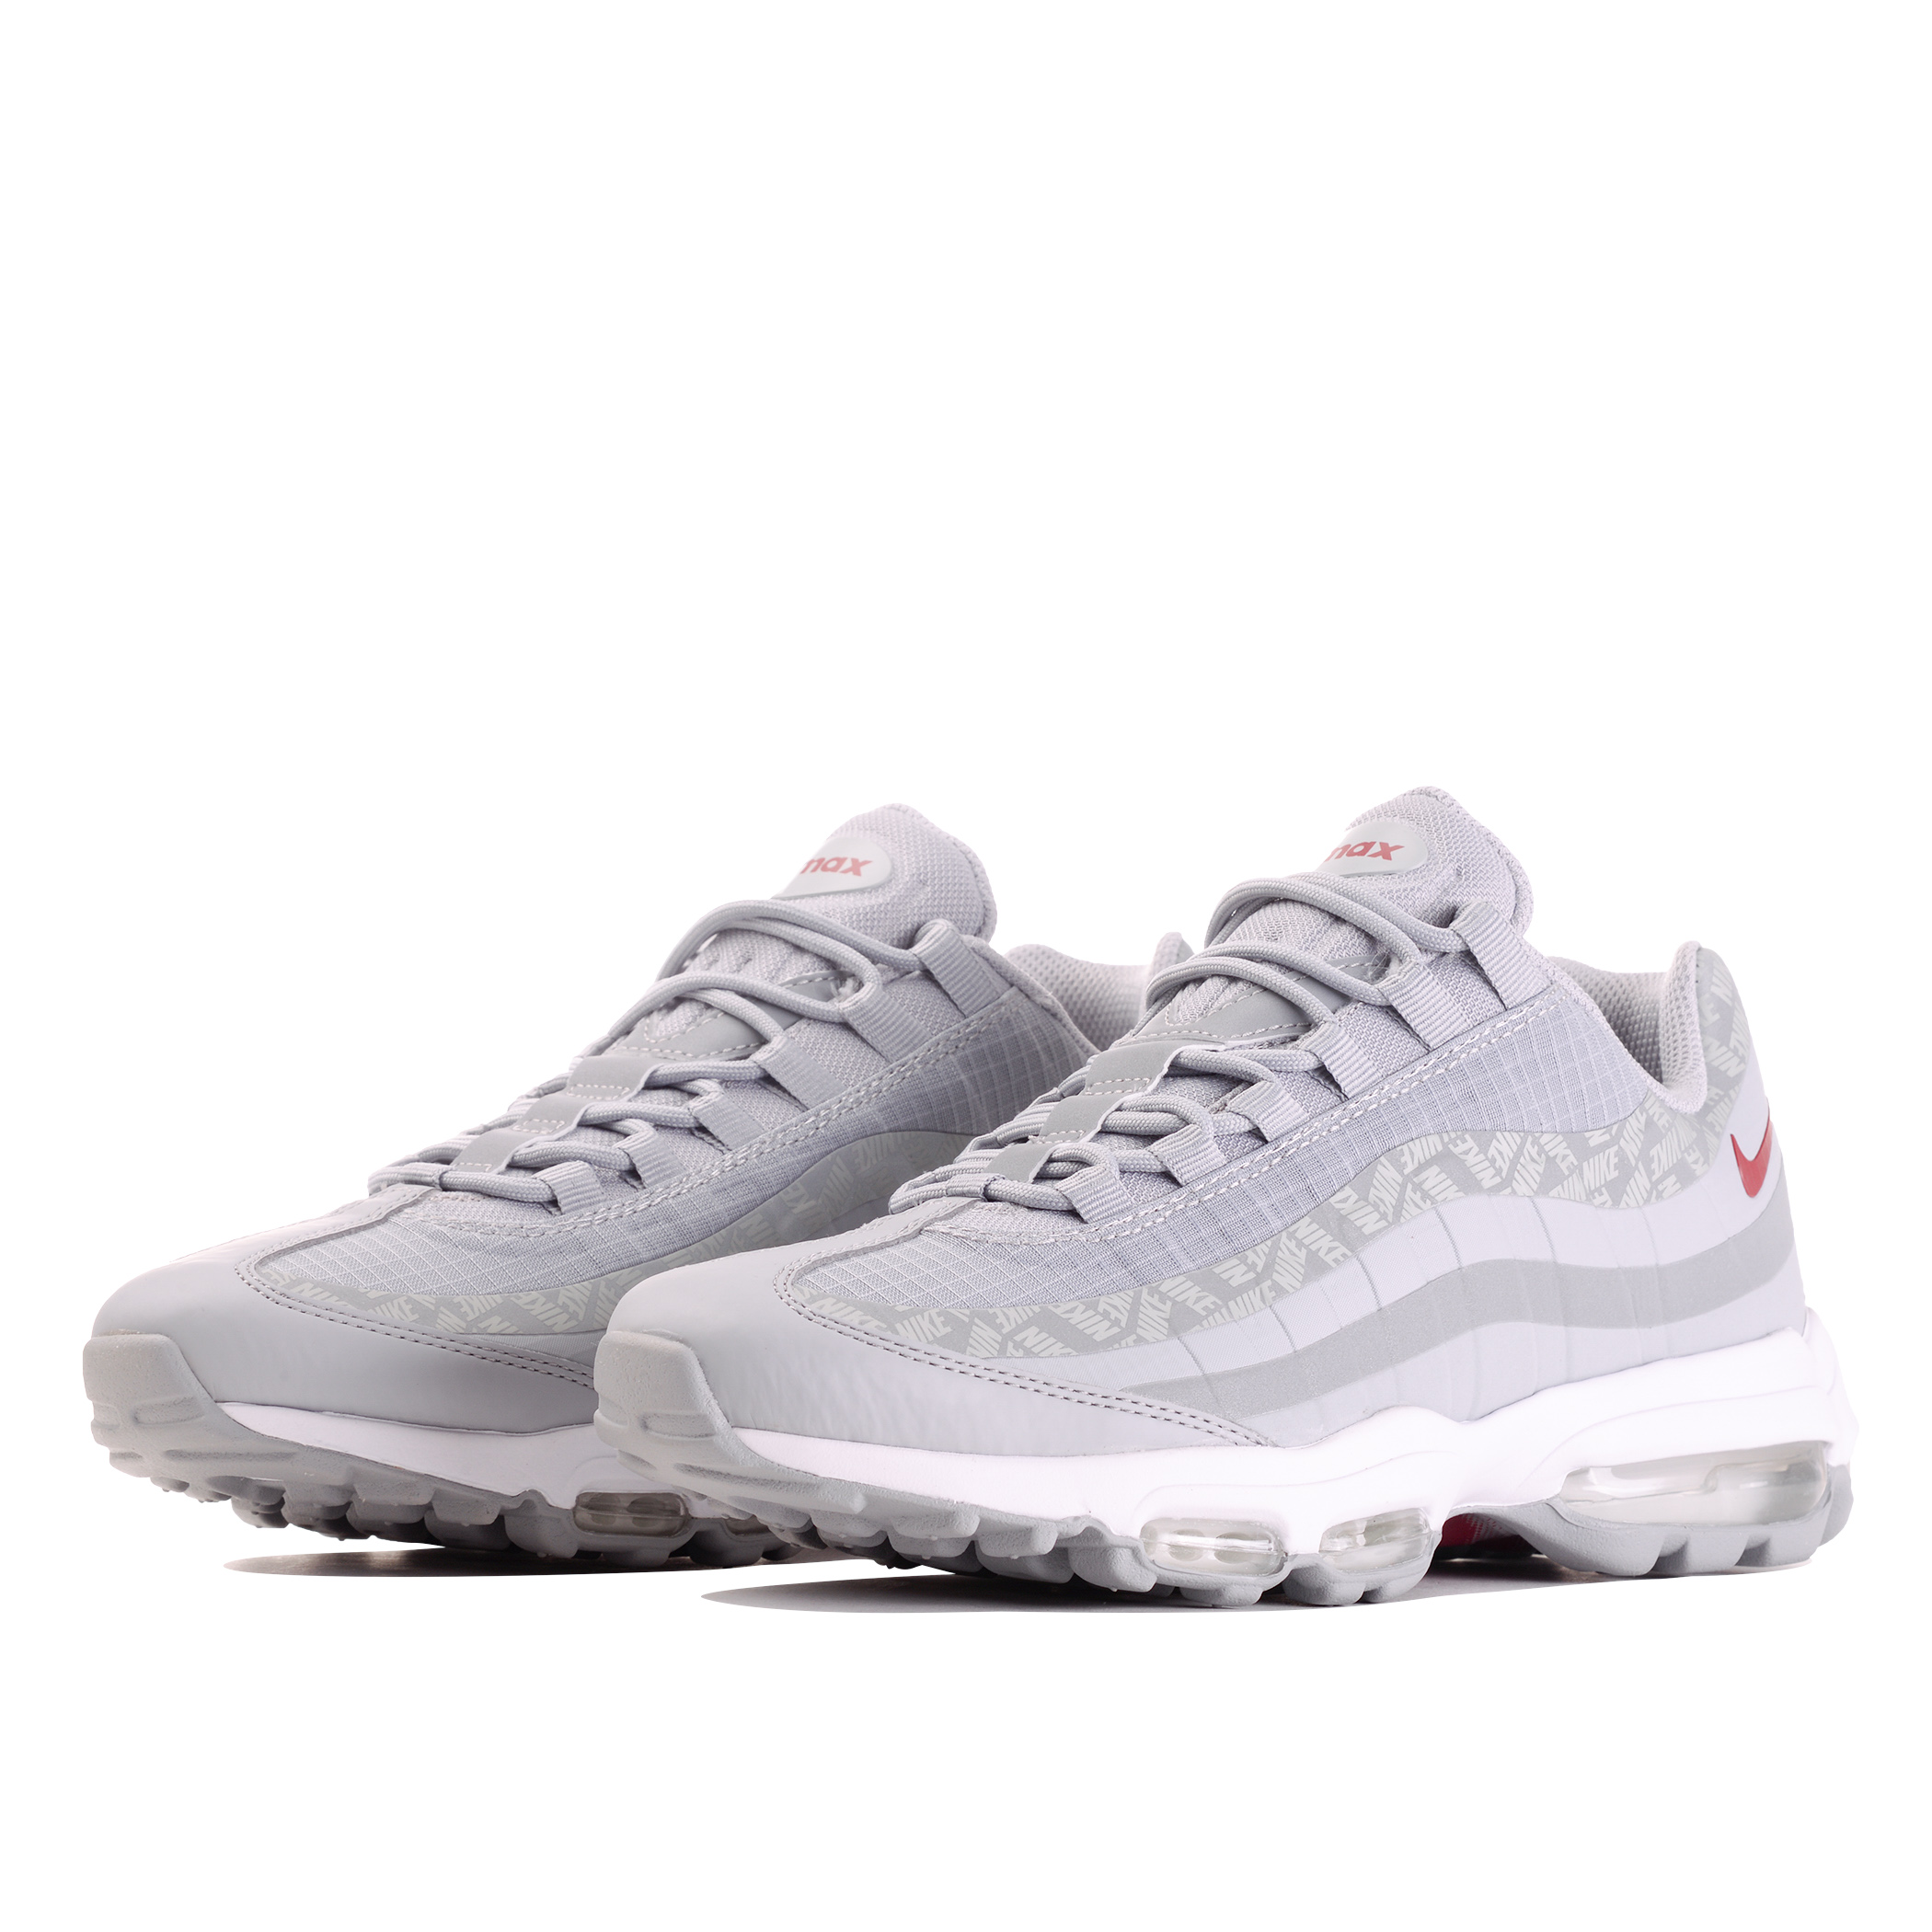 air max 95 ultra wolf grey red crush